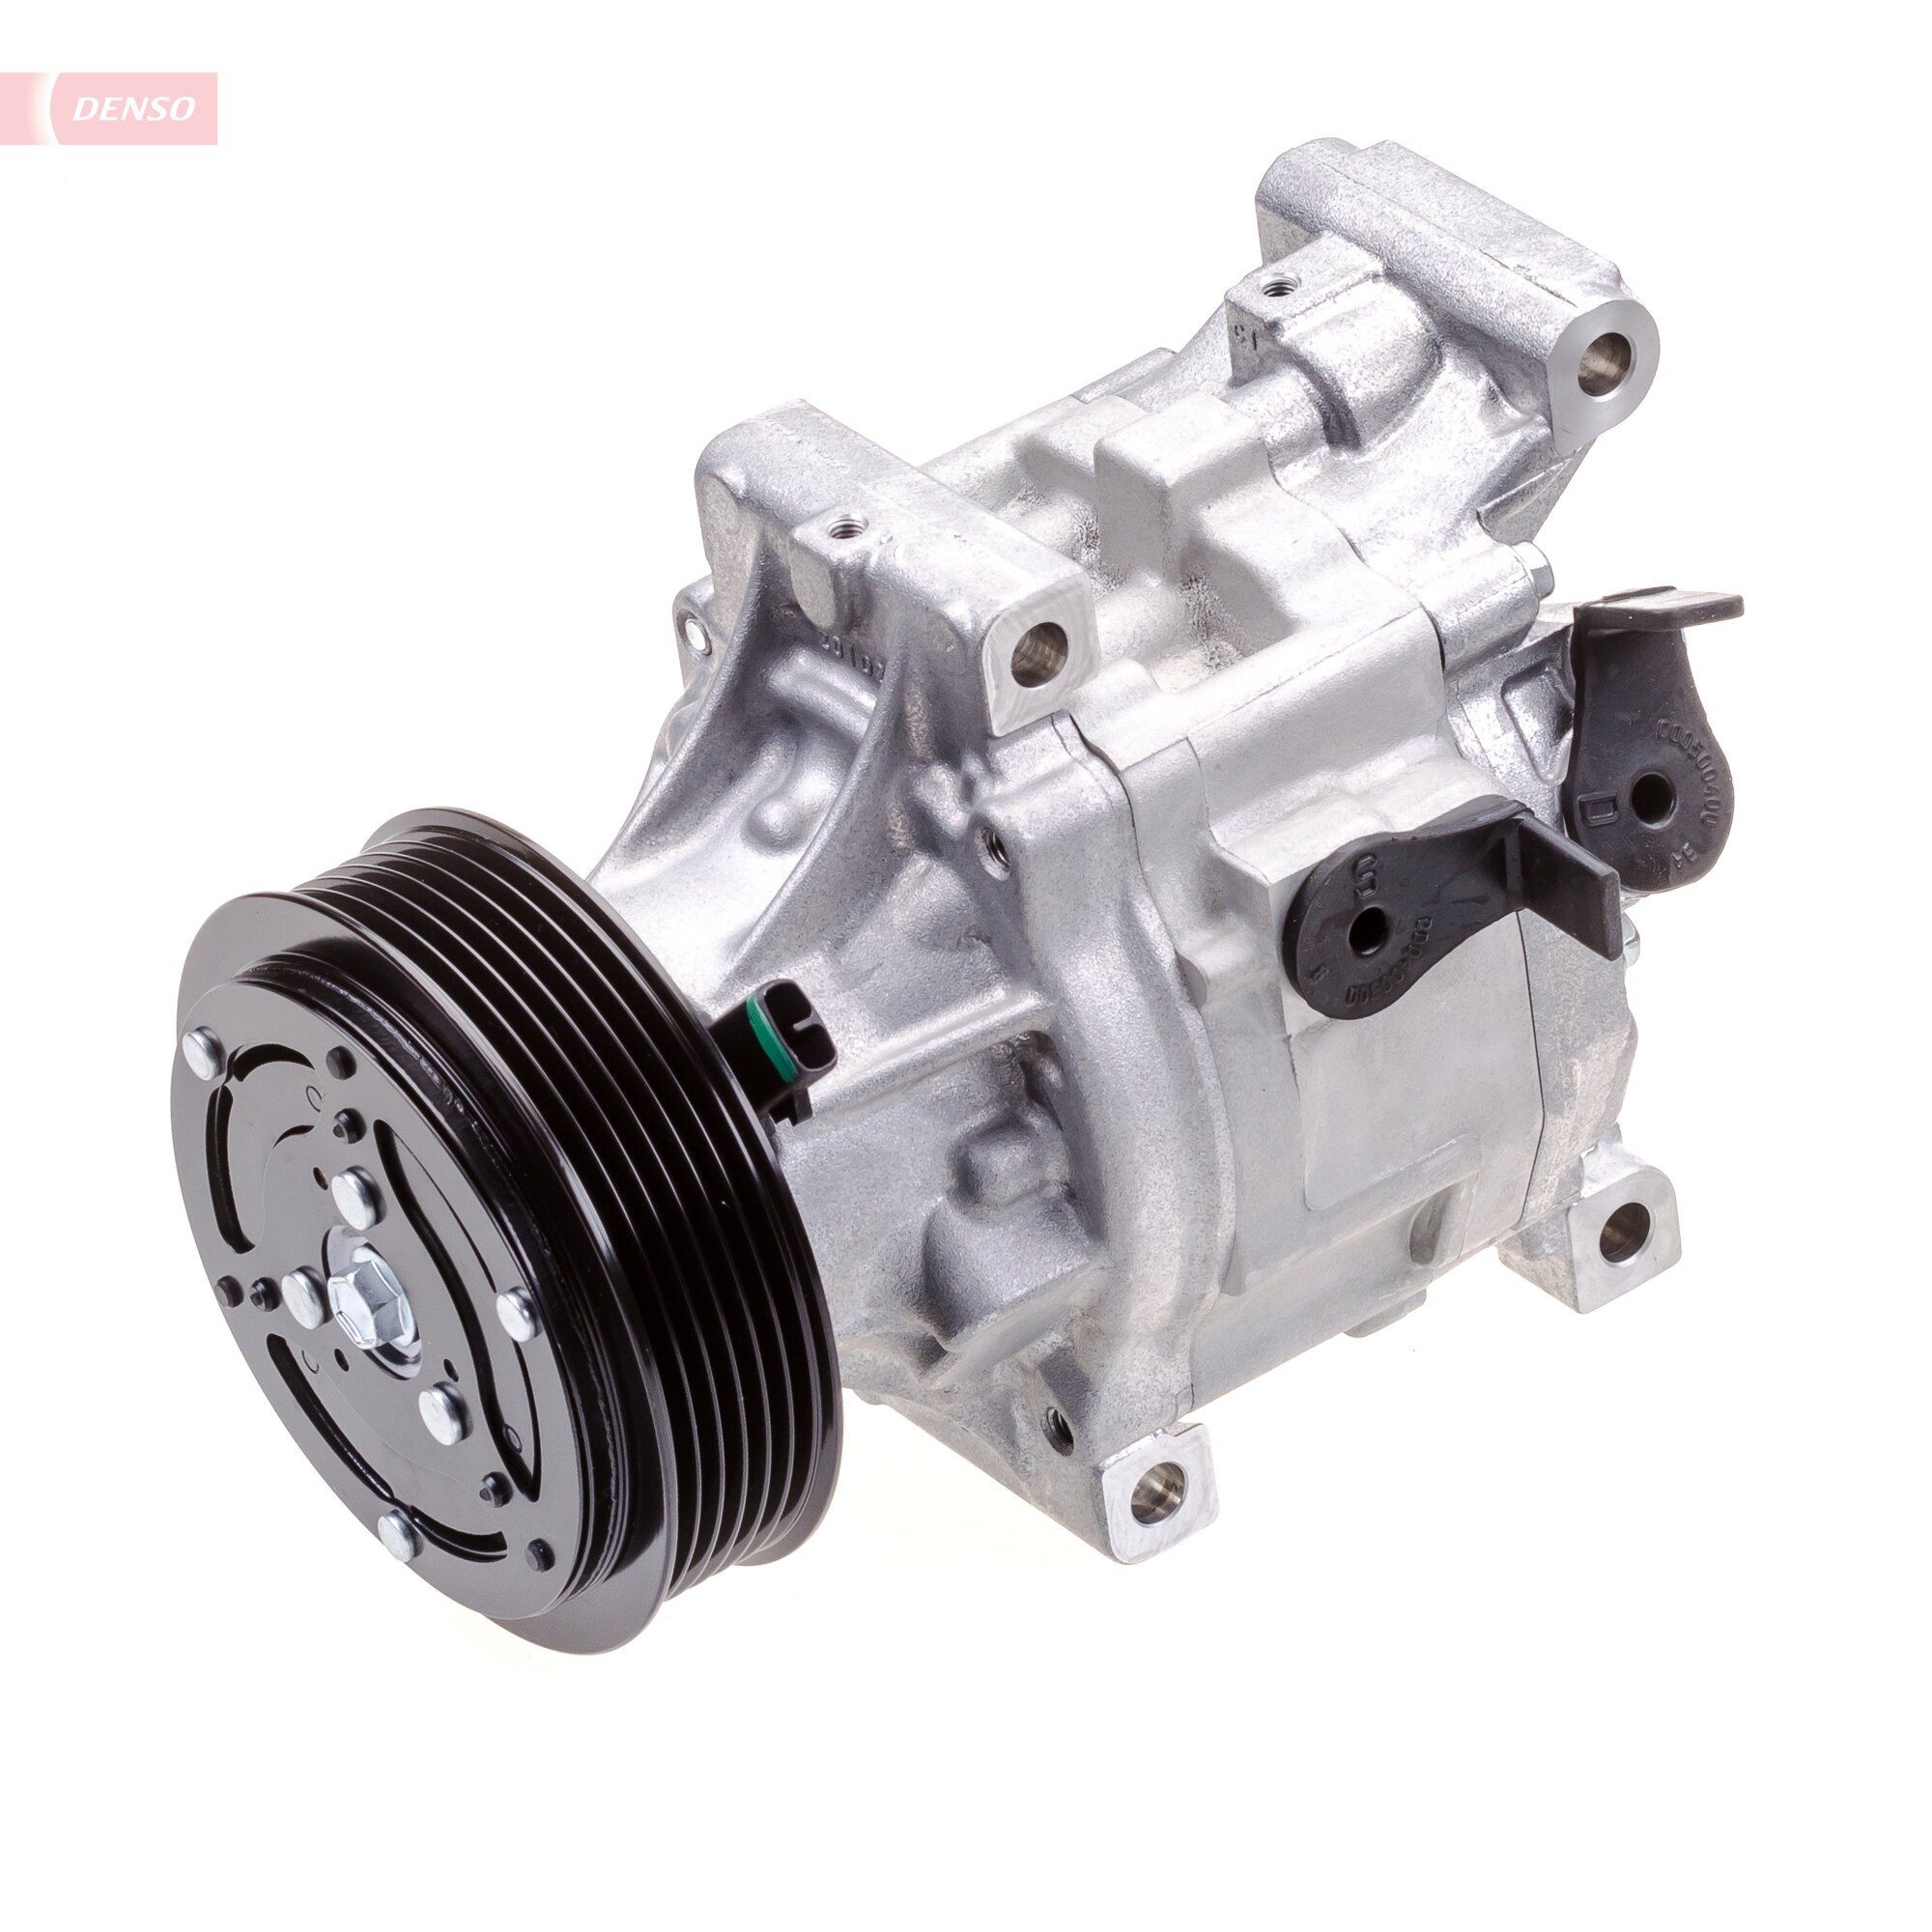 DENSO DCP09060 Air conditioning compressor SCSC06, 12V, PAG 46 YF, R 1234yf, R 134a, with magnetic clutch